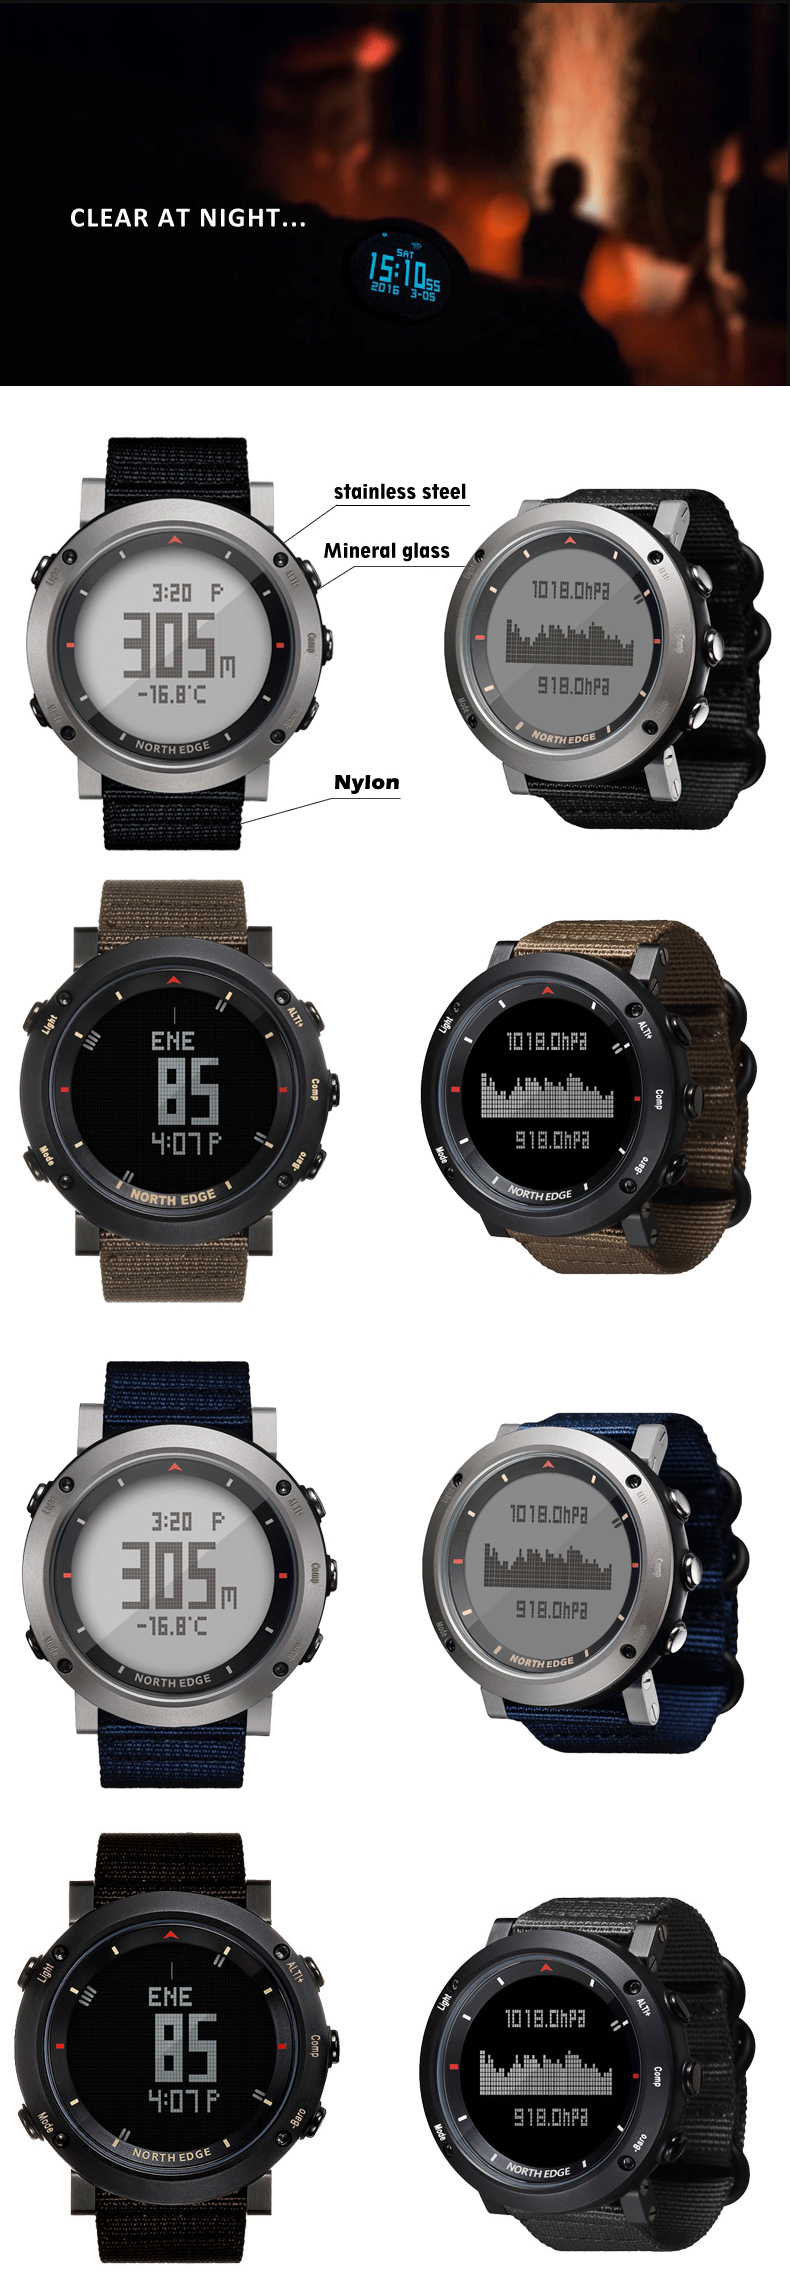 NORTH-EDGE-ALTAY-Altimeter-Compass-Air-Pressure-Chart-Outdoor-Sport-Nylon-Band-Digital-Watch-1407895